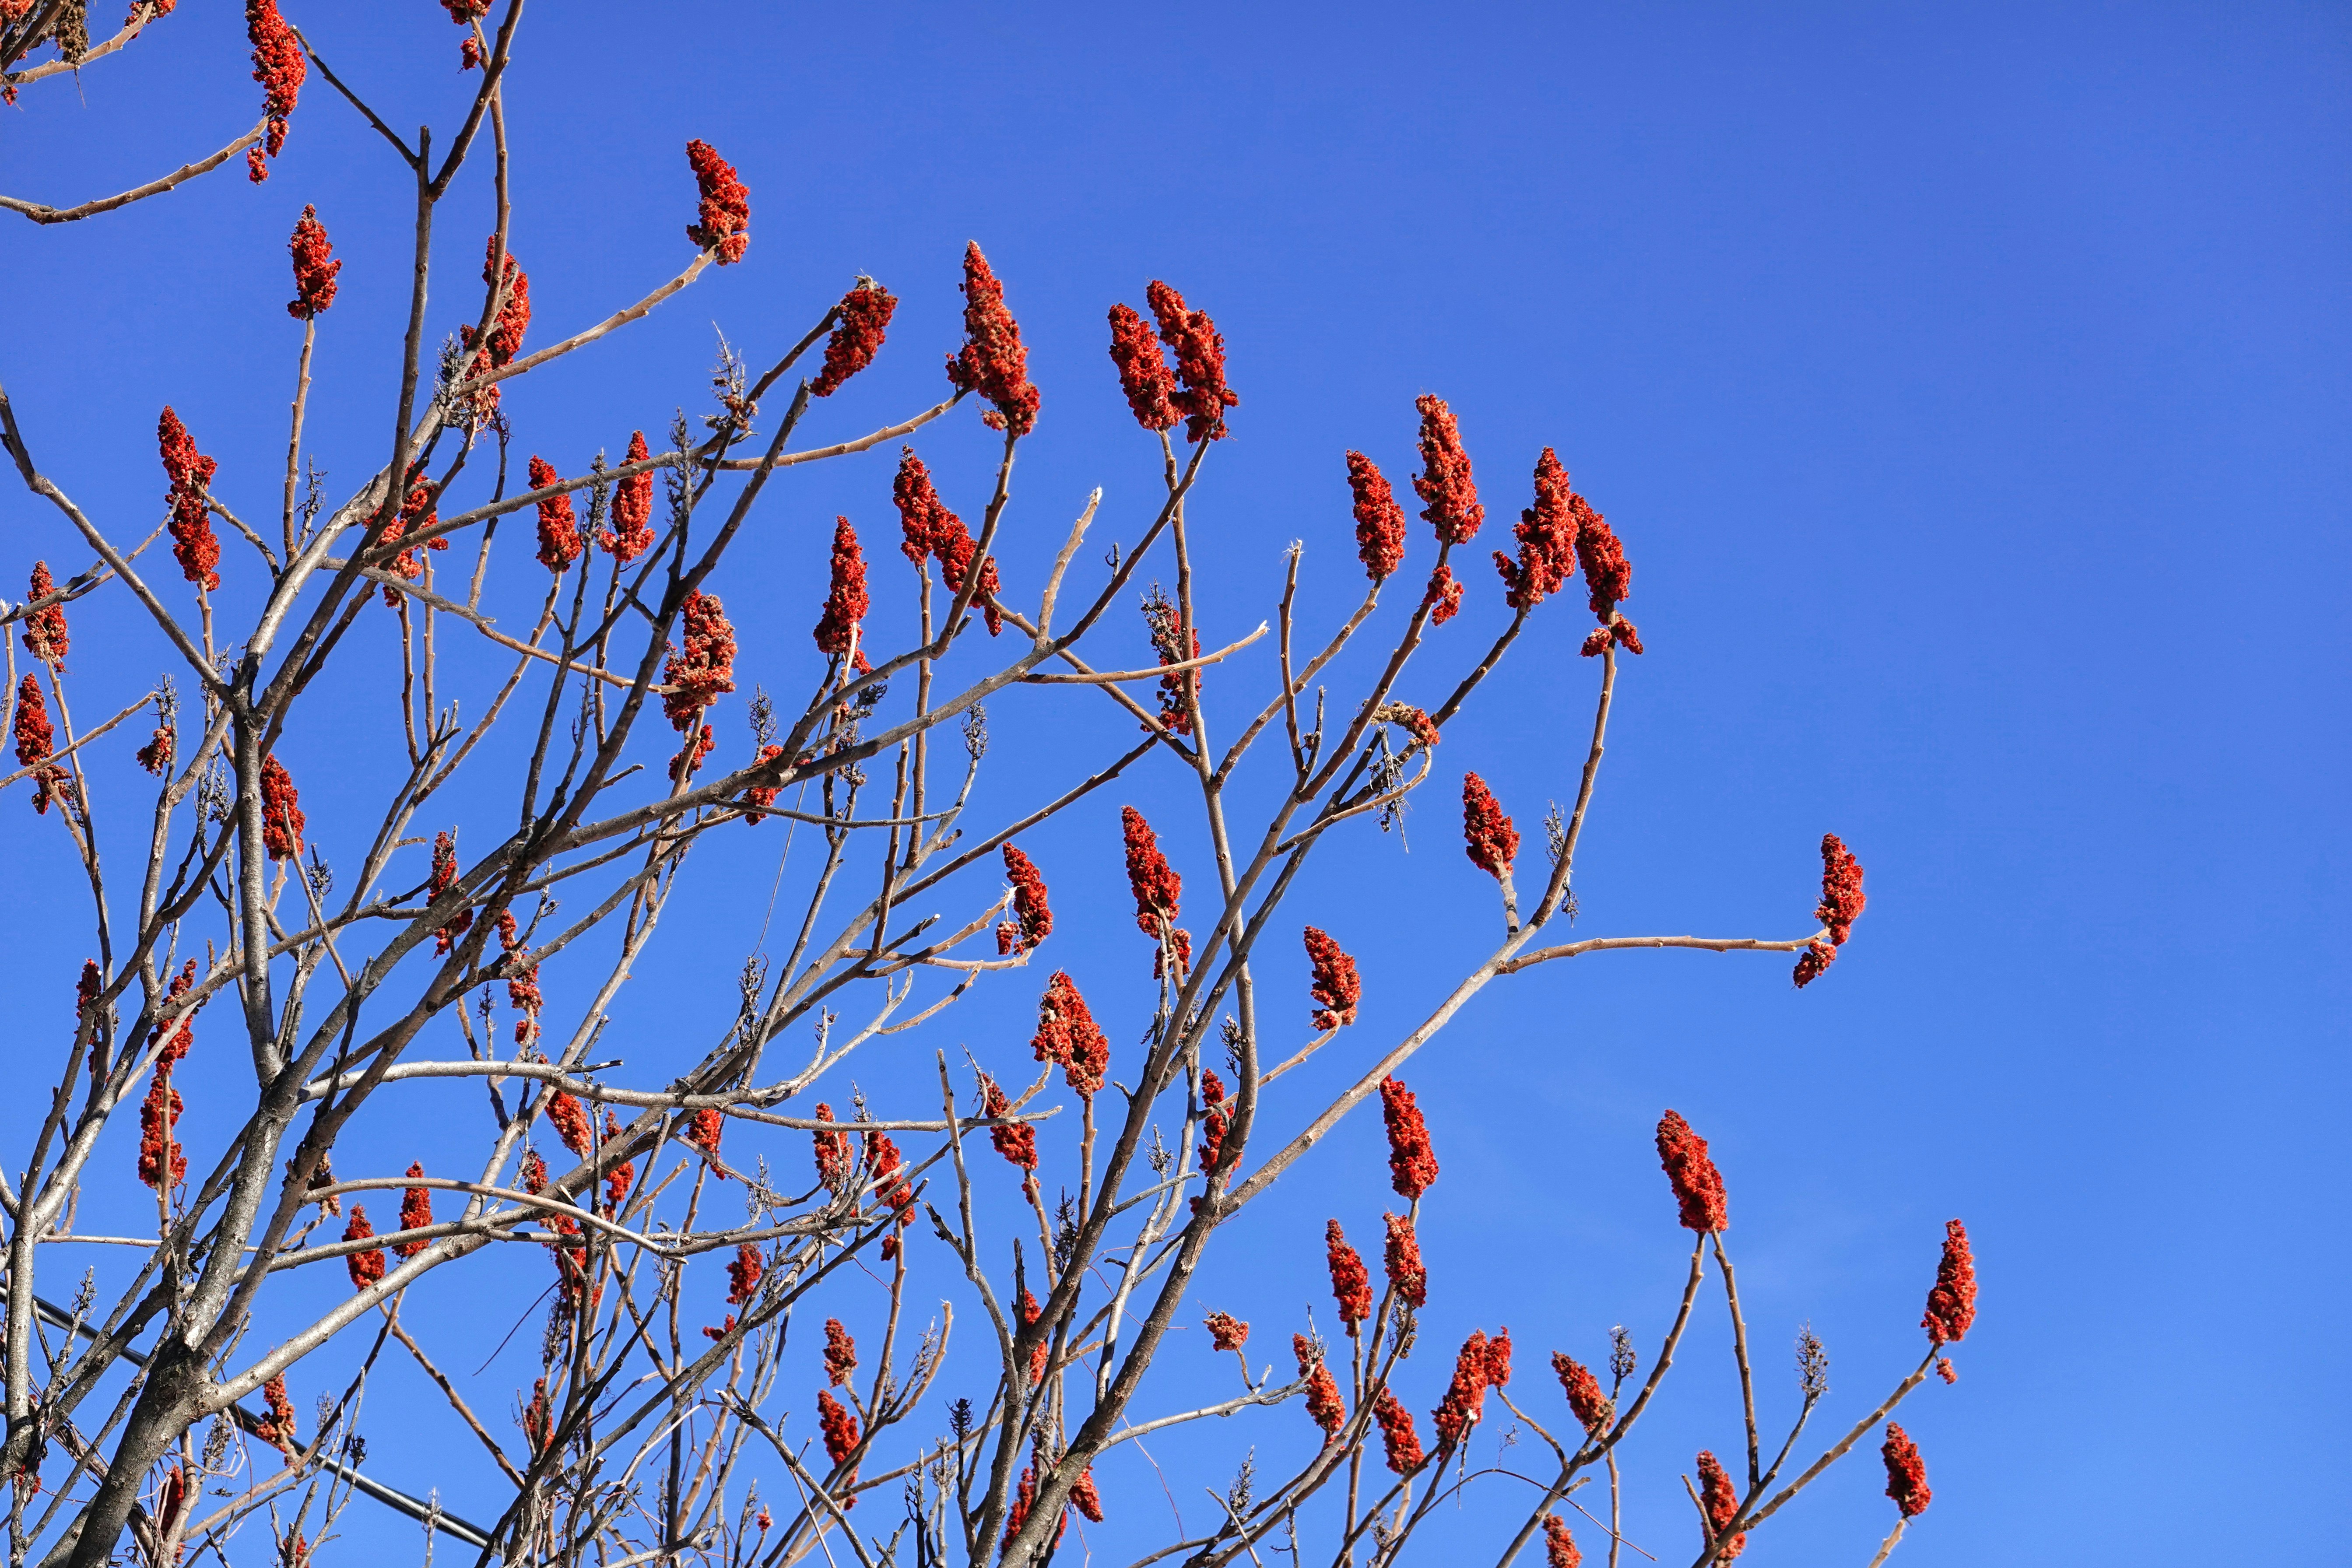 red and brown flowers on brown tree branch under blue sky during daytime